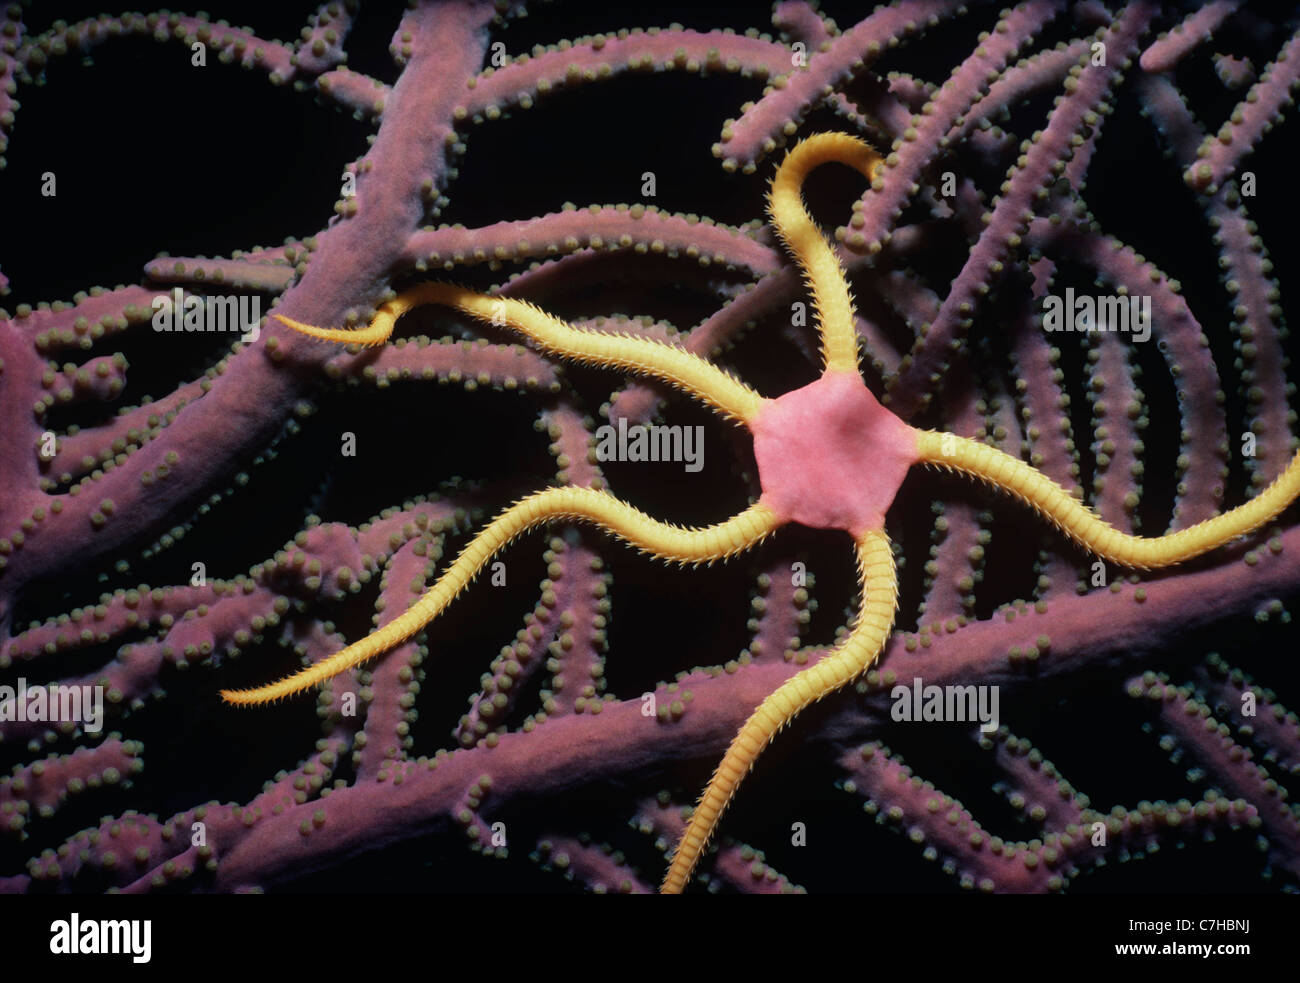 Gaudy Brittle Star (Ophioderma ensiferum) on coral at night. Caribbean Sea Stock Photo